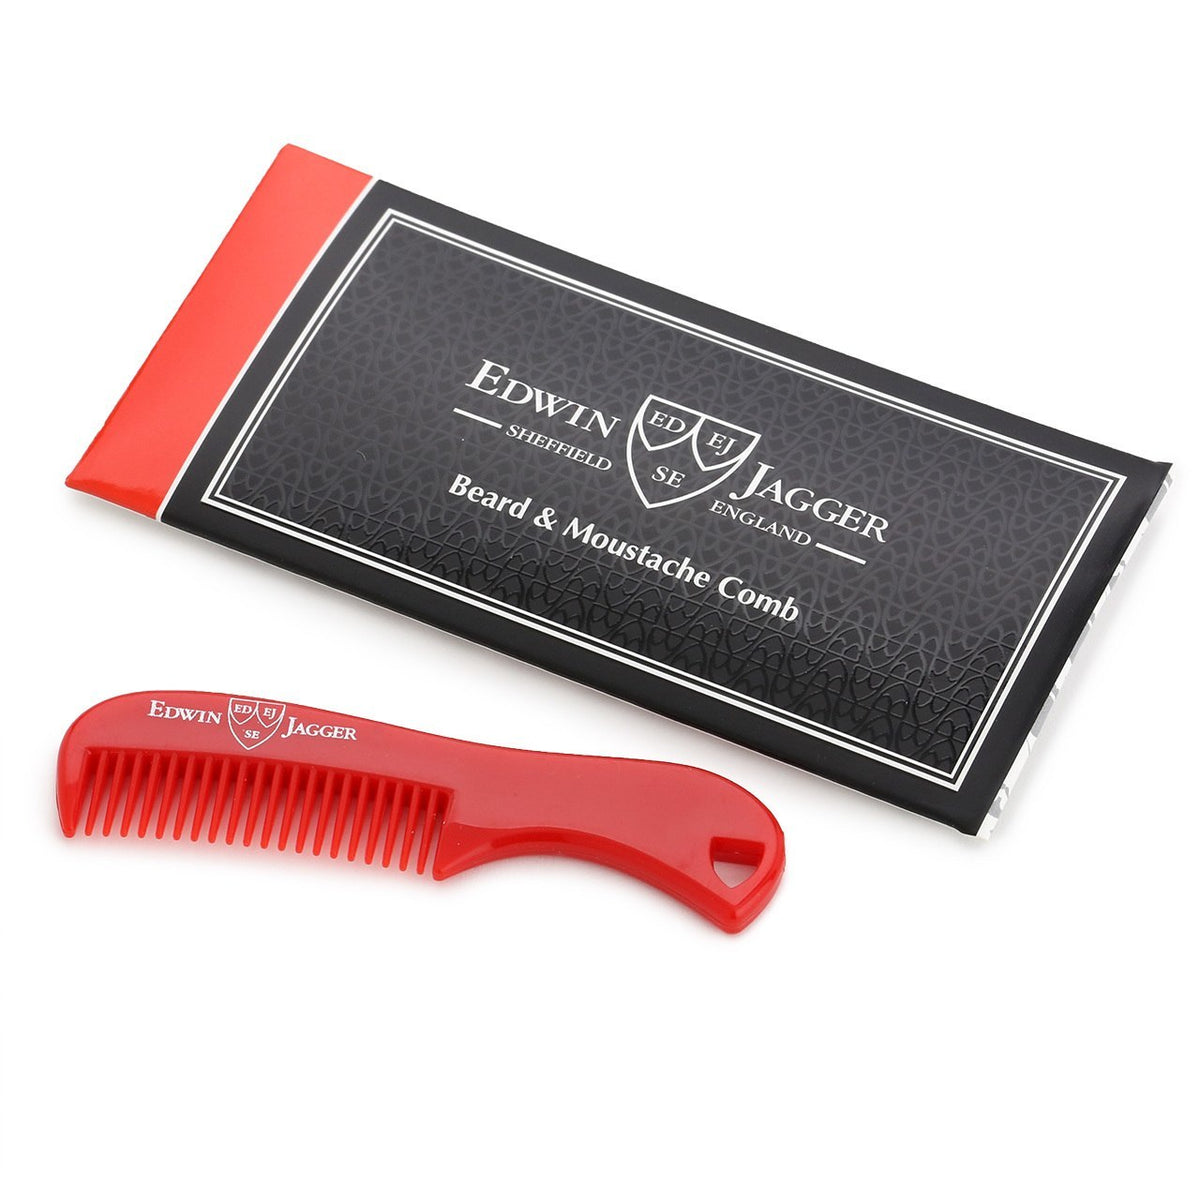 Edwin Jagger Moustache Comb - Red